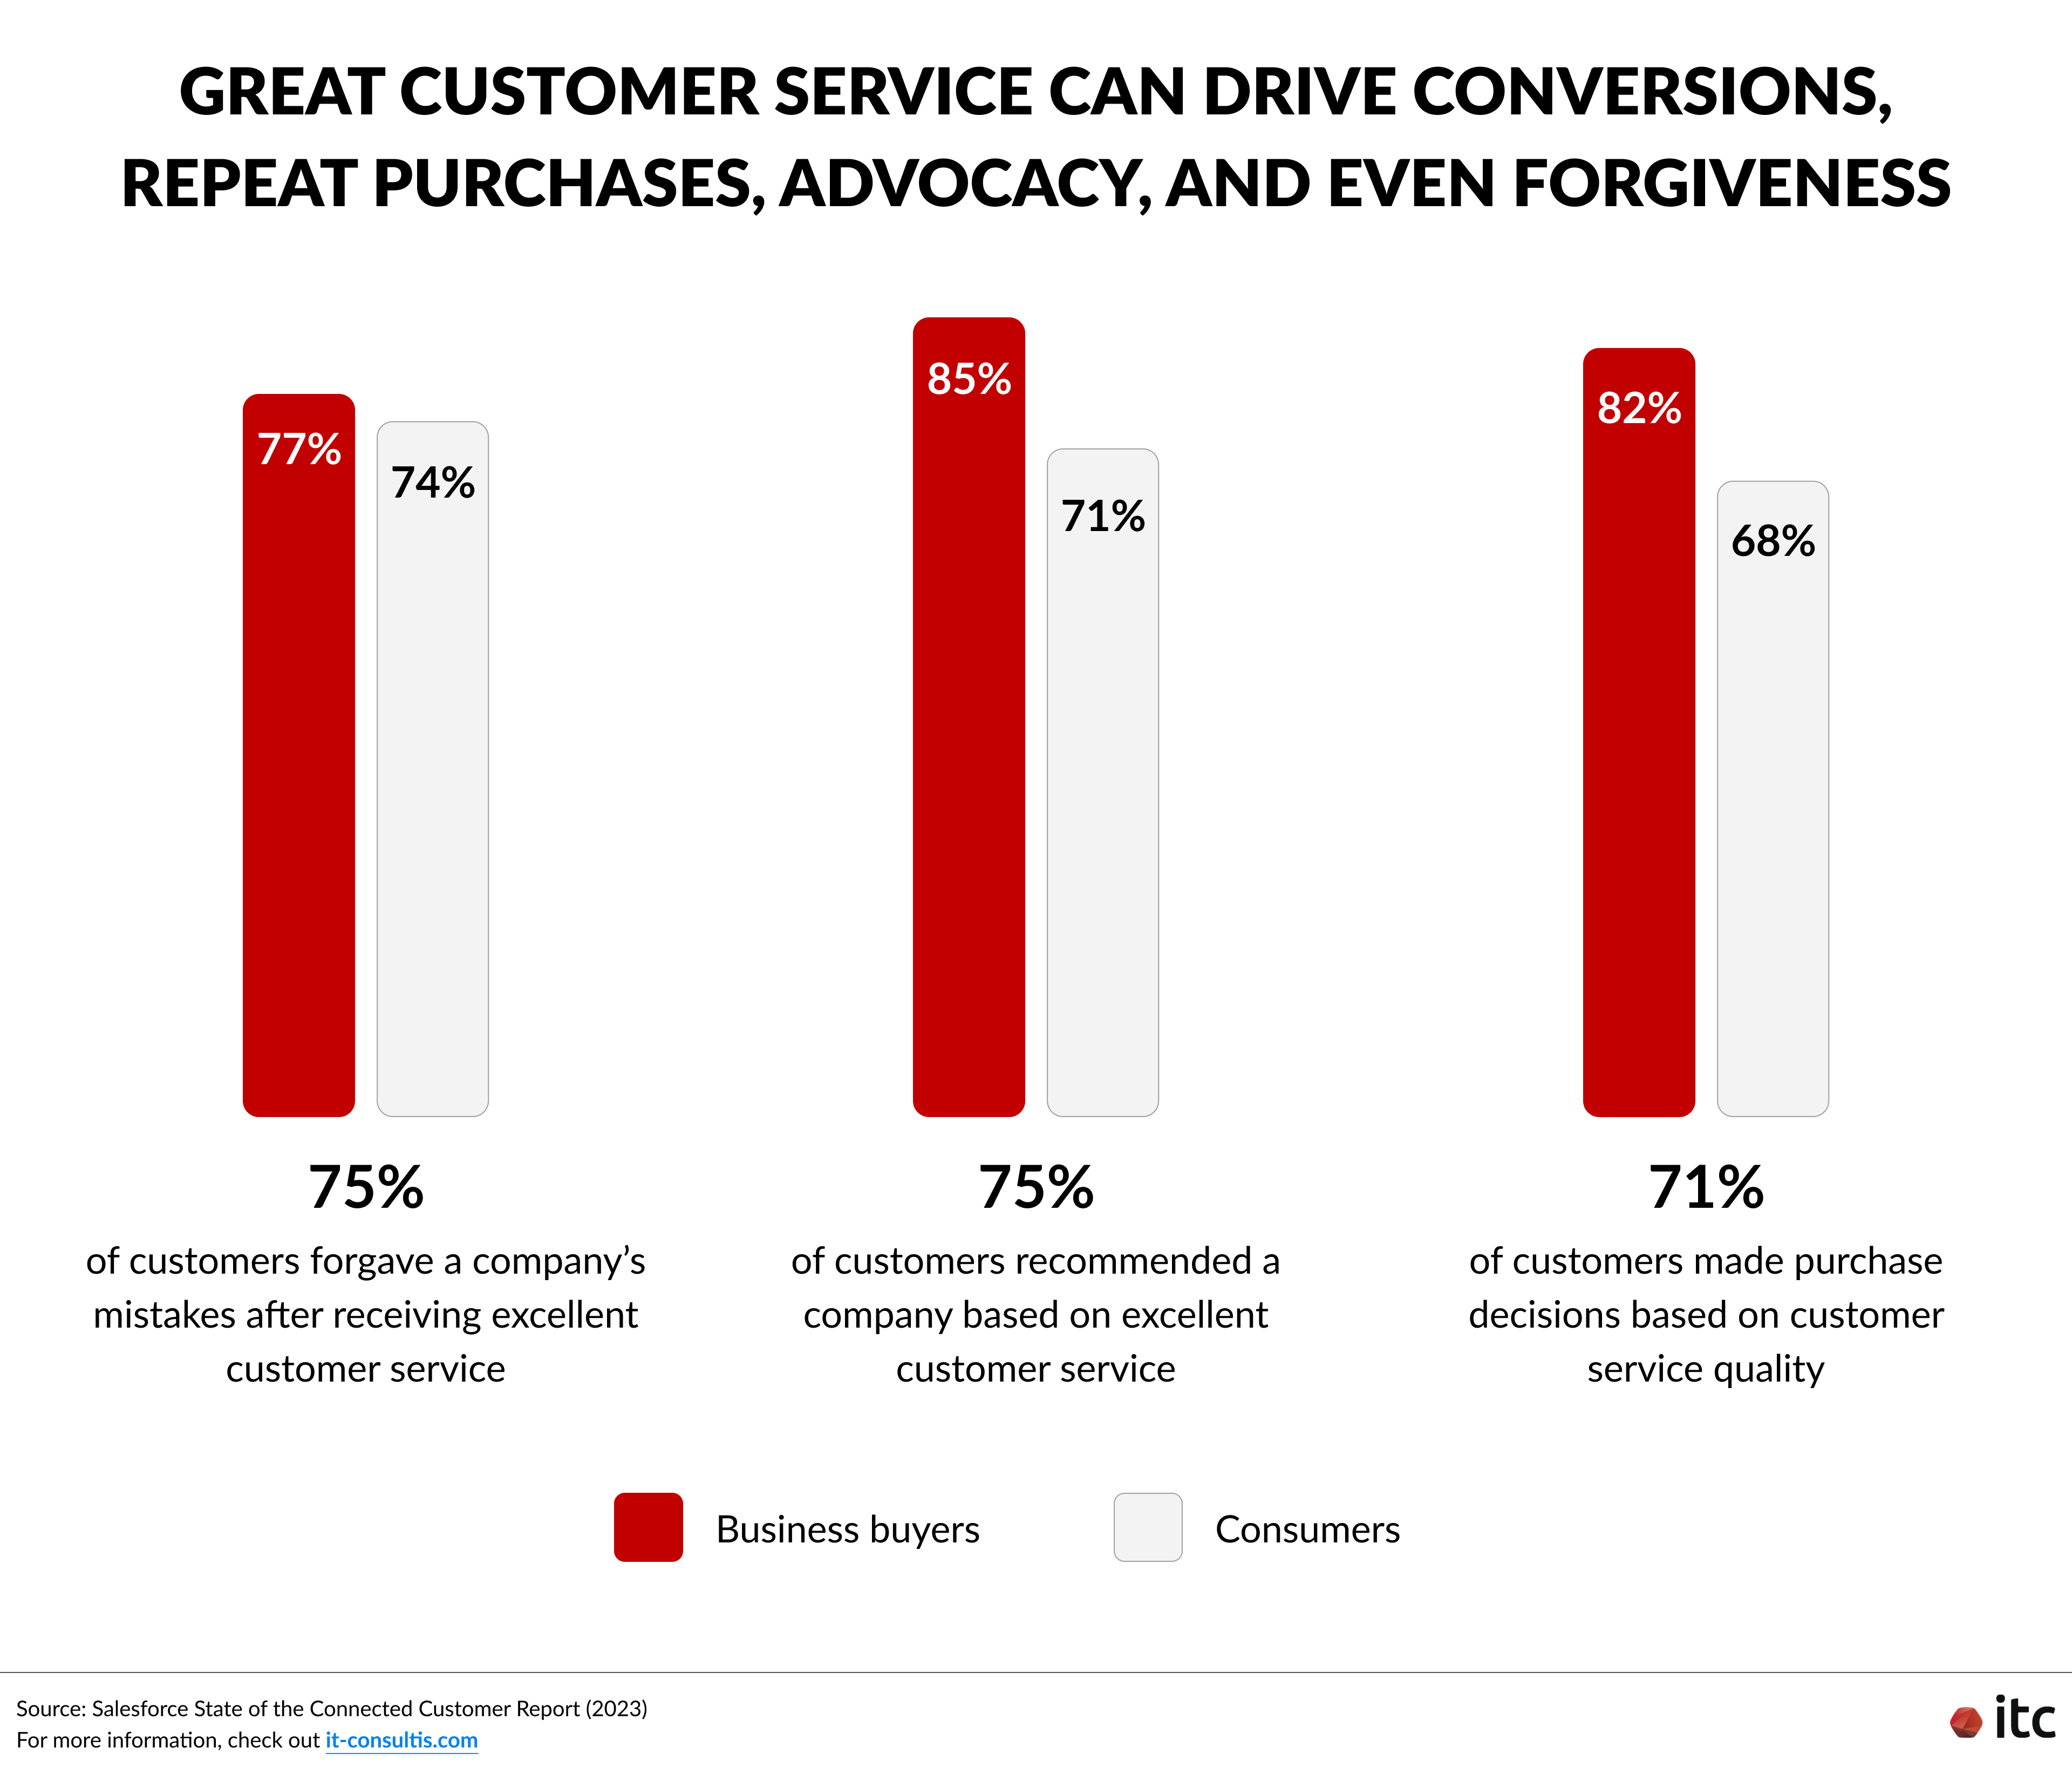 Great customer service can drive conversions, repeat purchases, advocacy, and even forgiveness